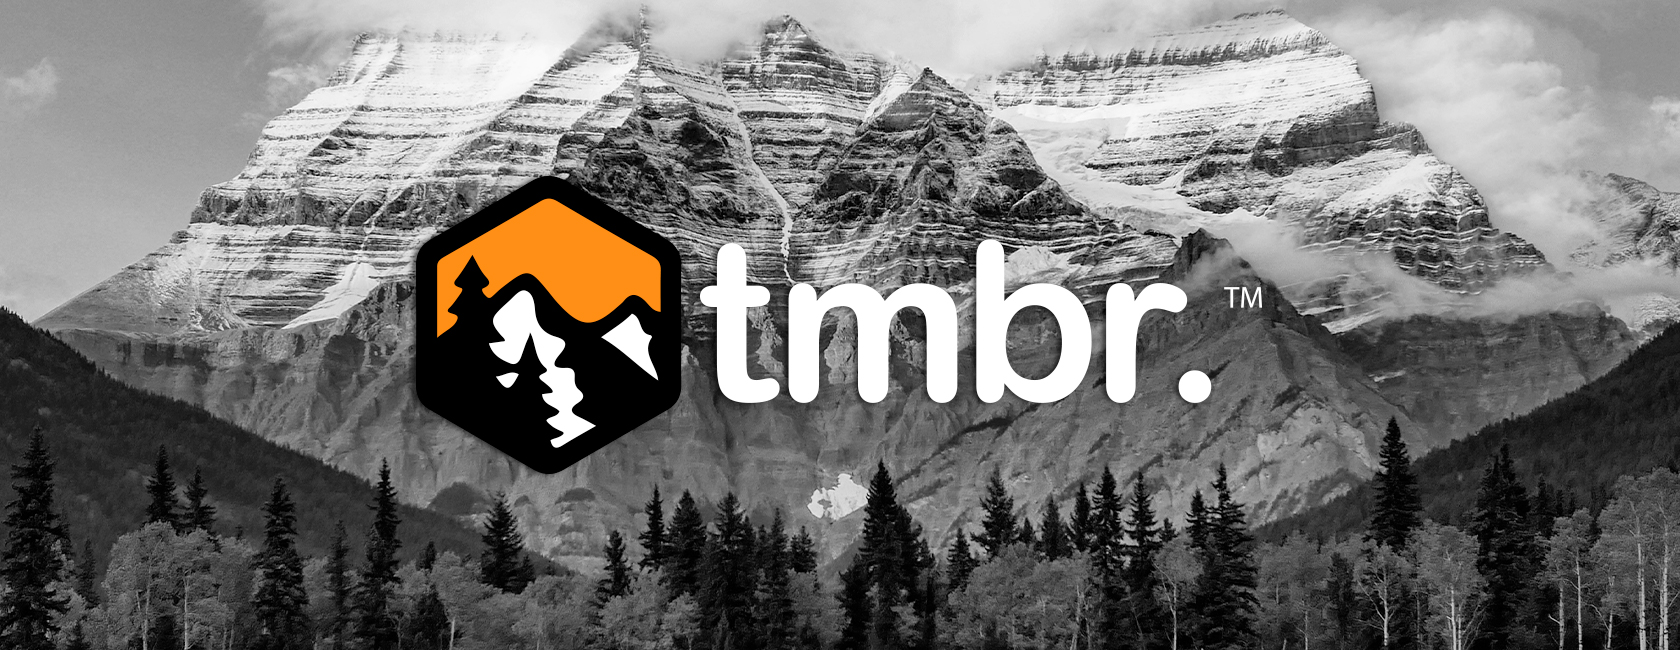 Tmbr logo with black and white room scene in background